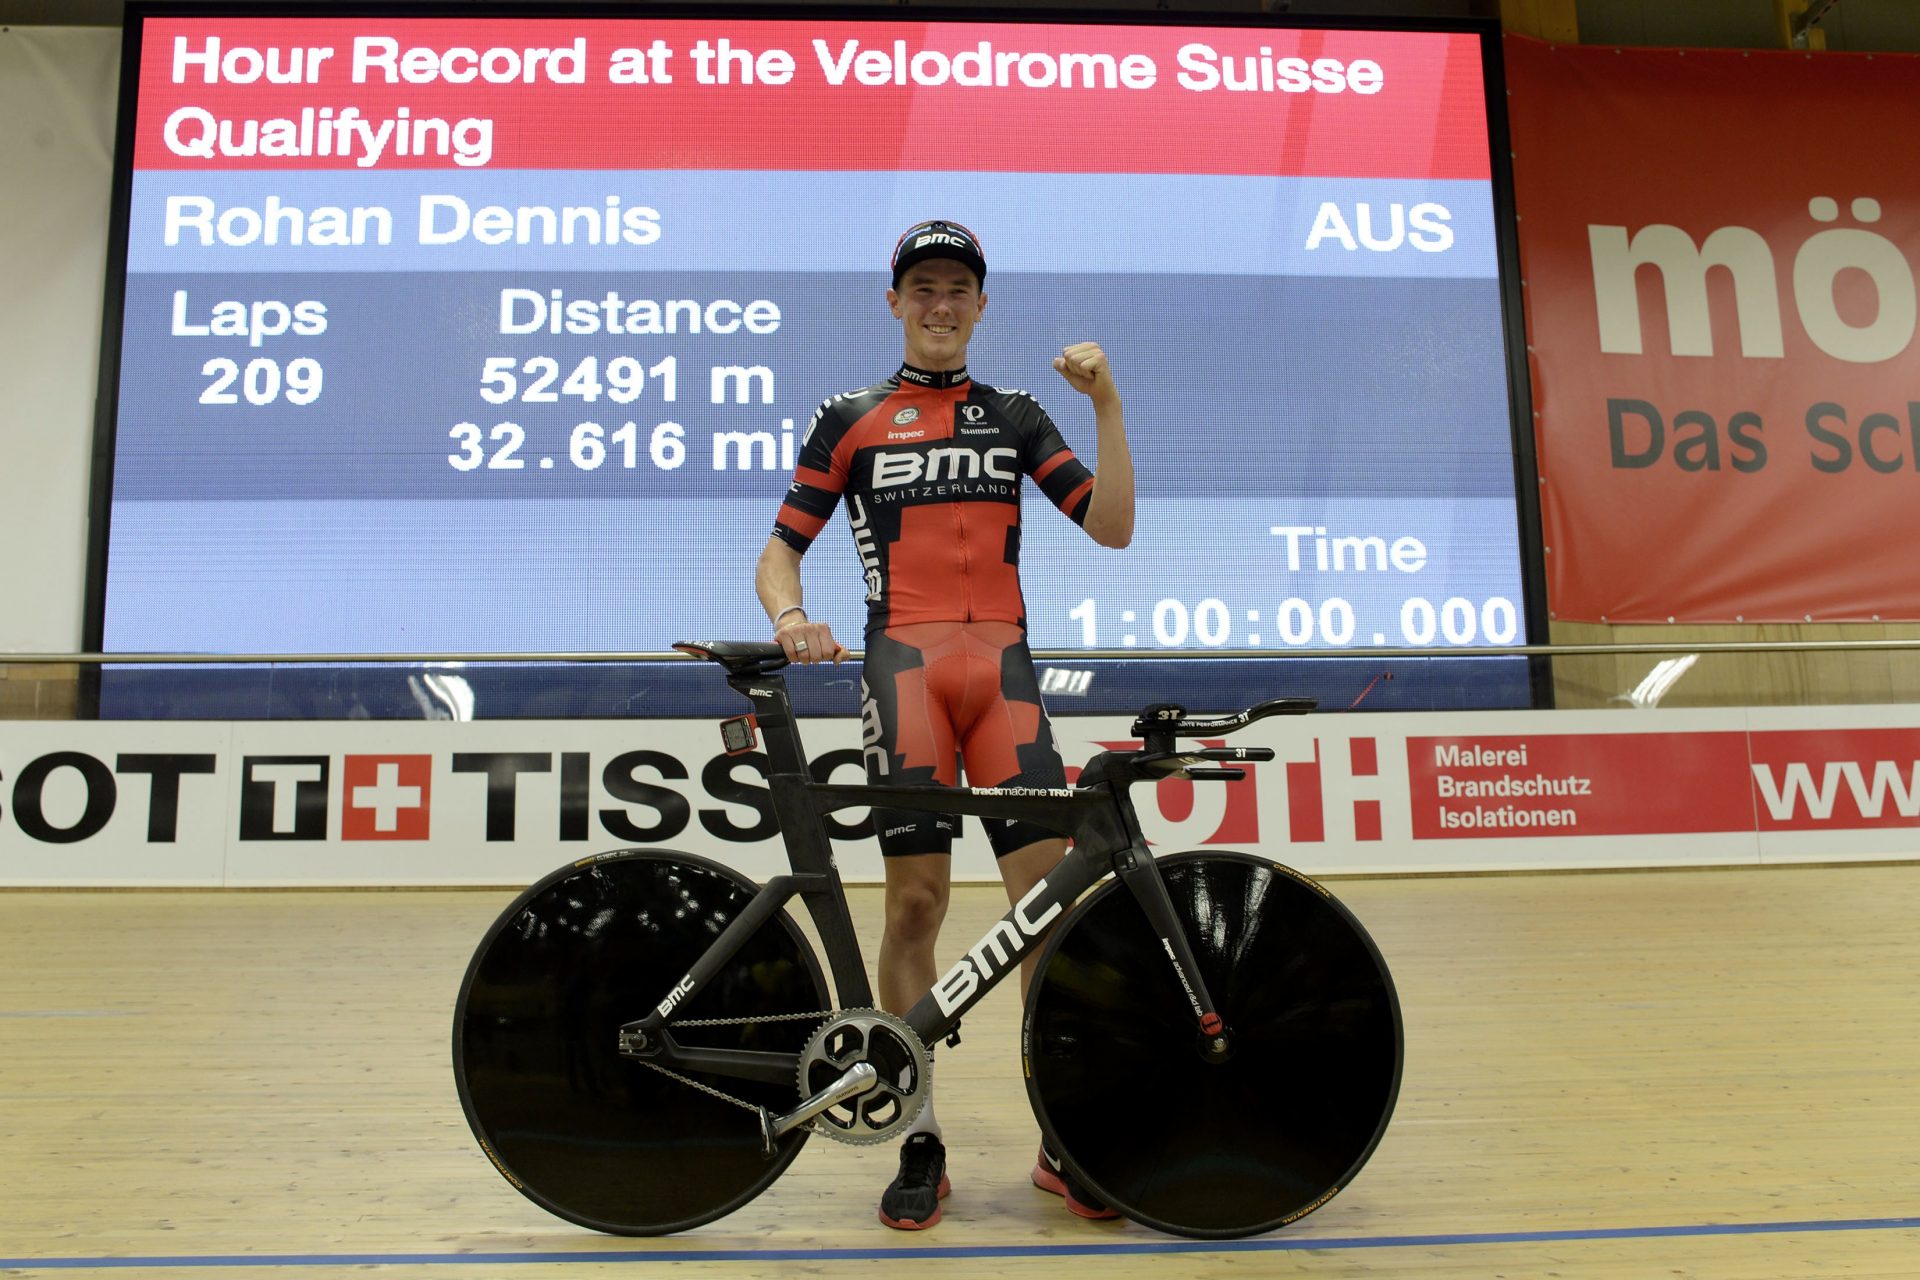 World Hour record